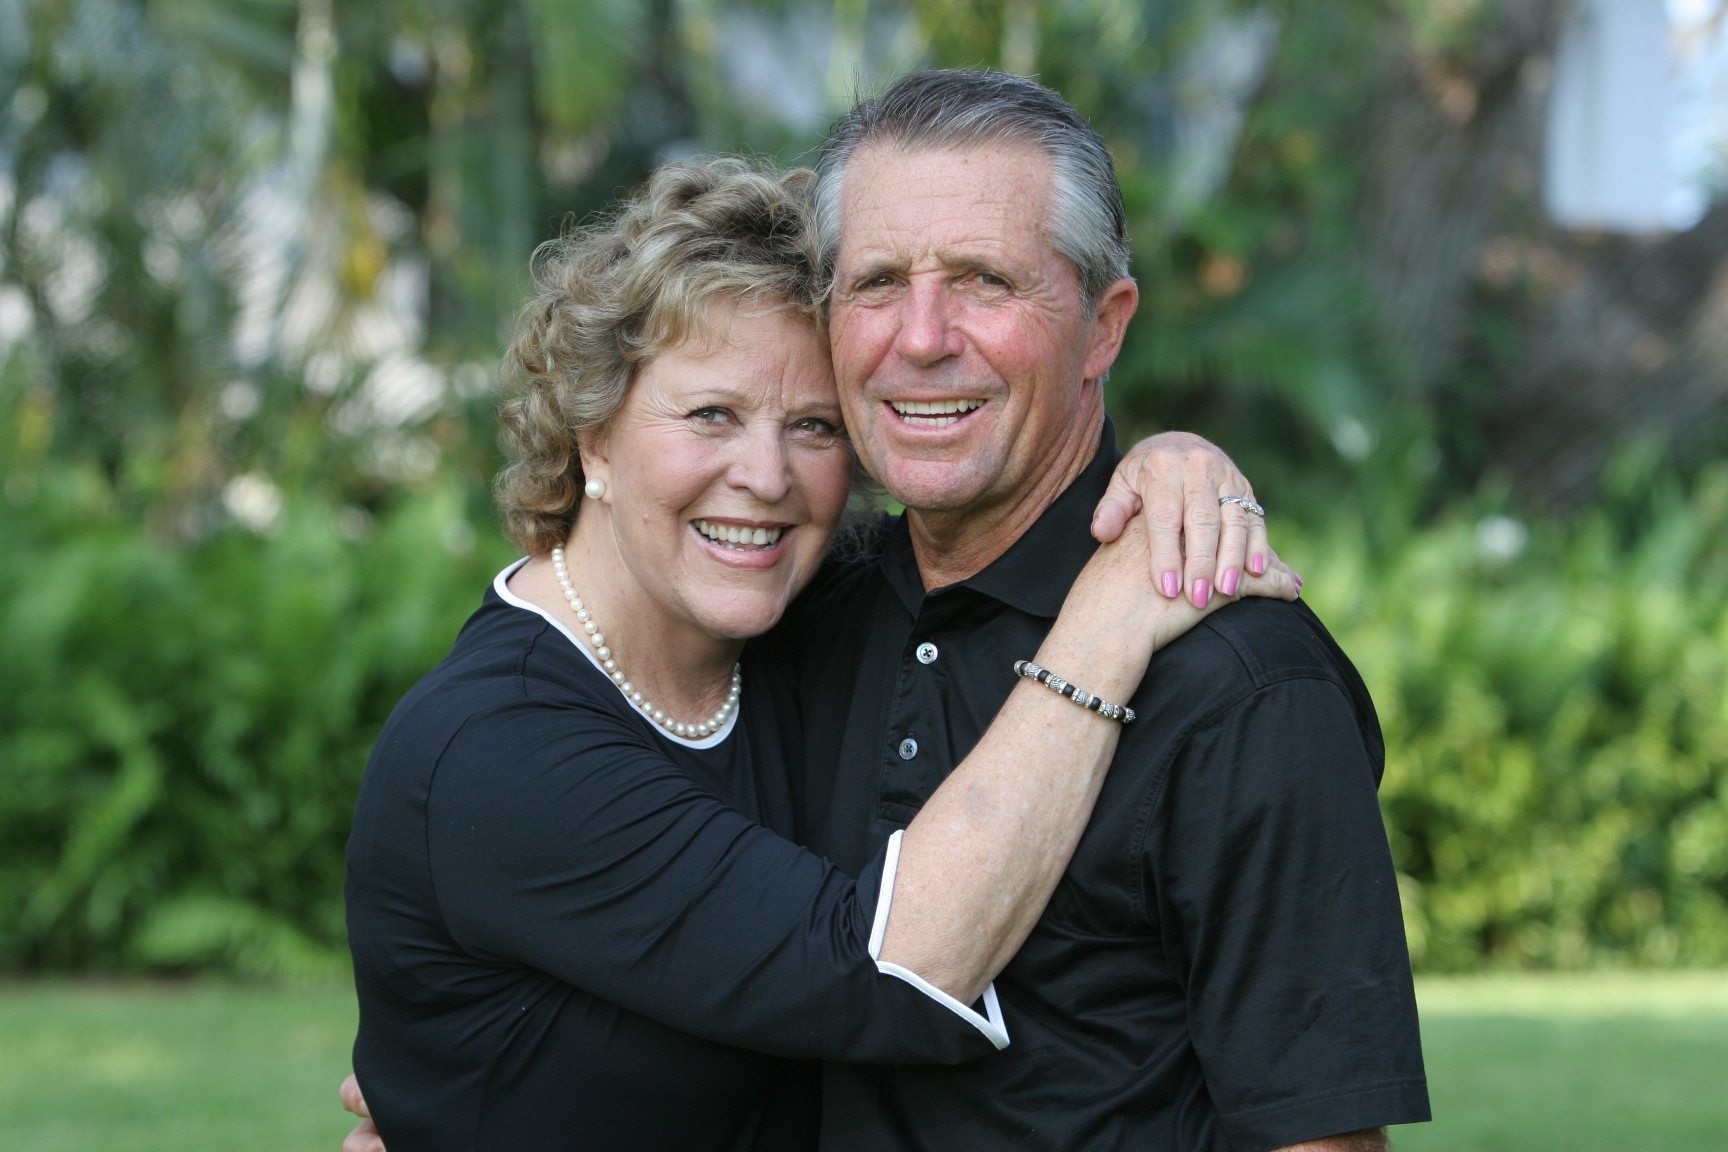 Golf legend Gary Player left devastated as beloved wife Vivienne dies from cancer after 64 years of marriage | The Sun